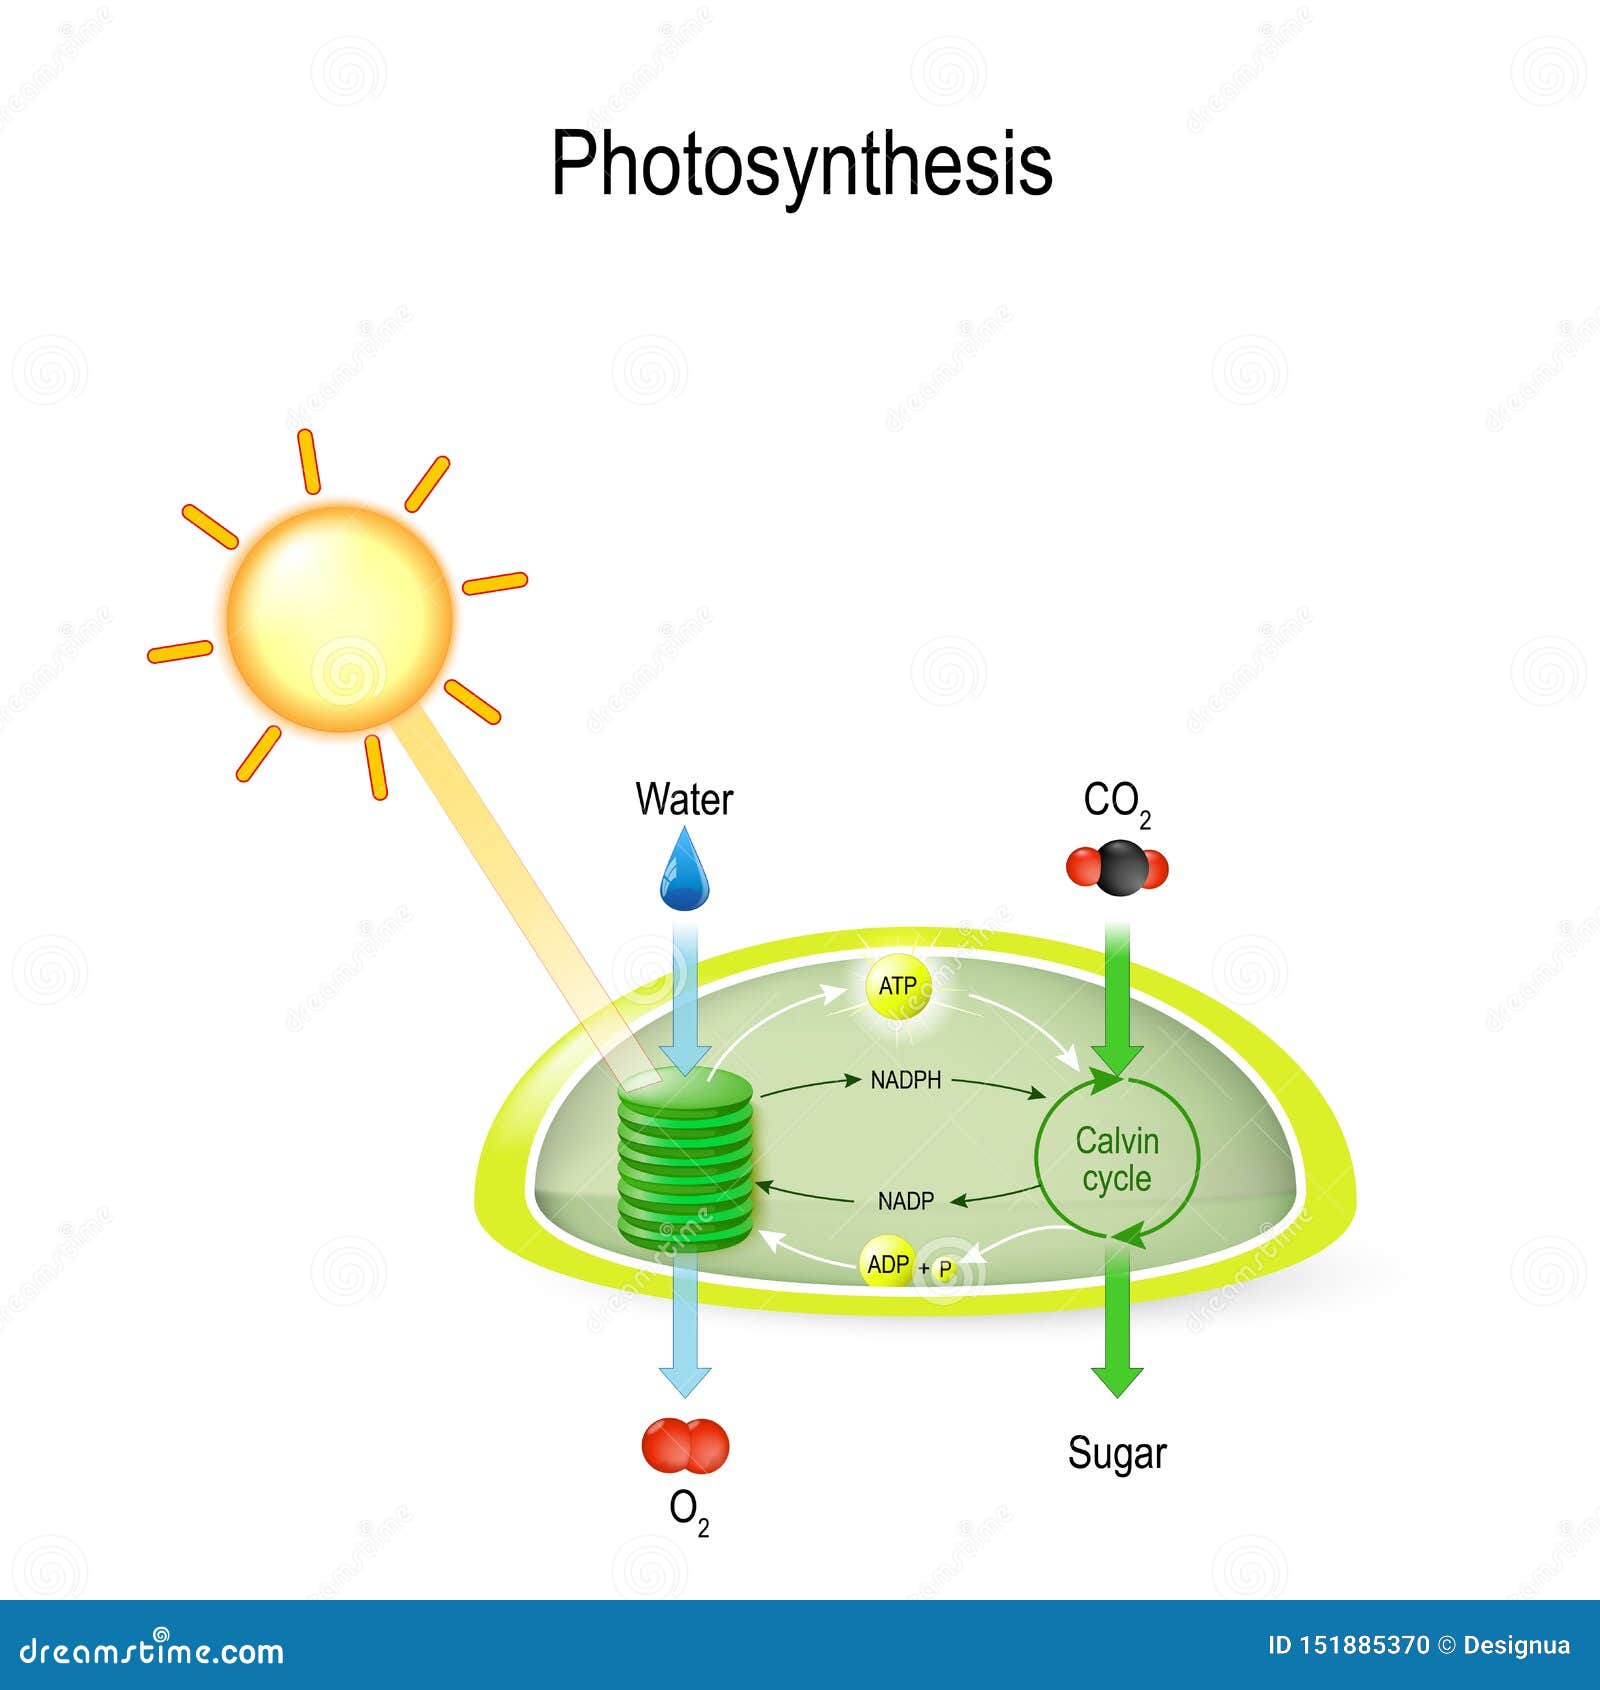 photosynthesis in a chloroplast